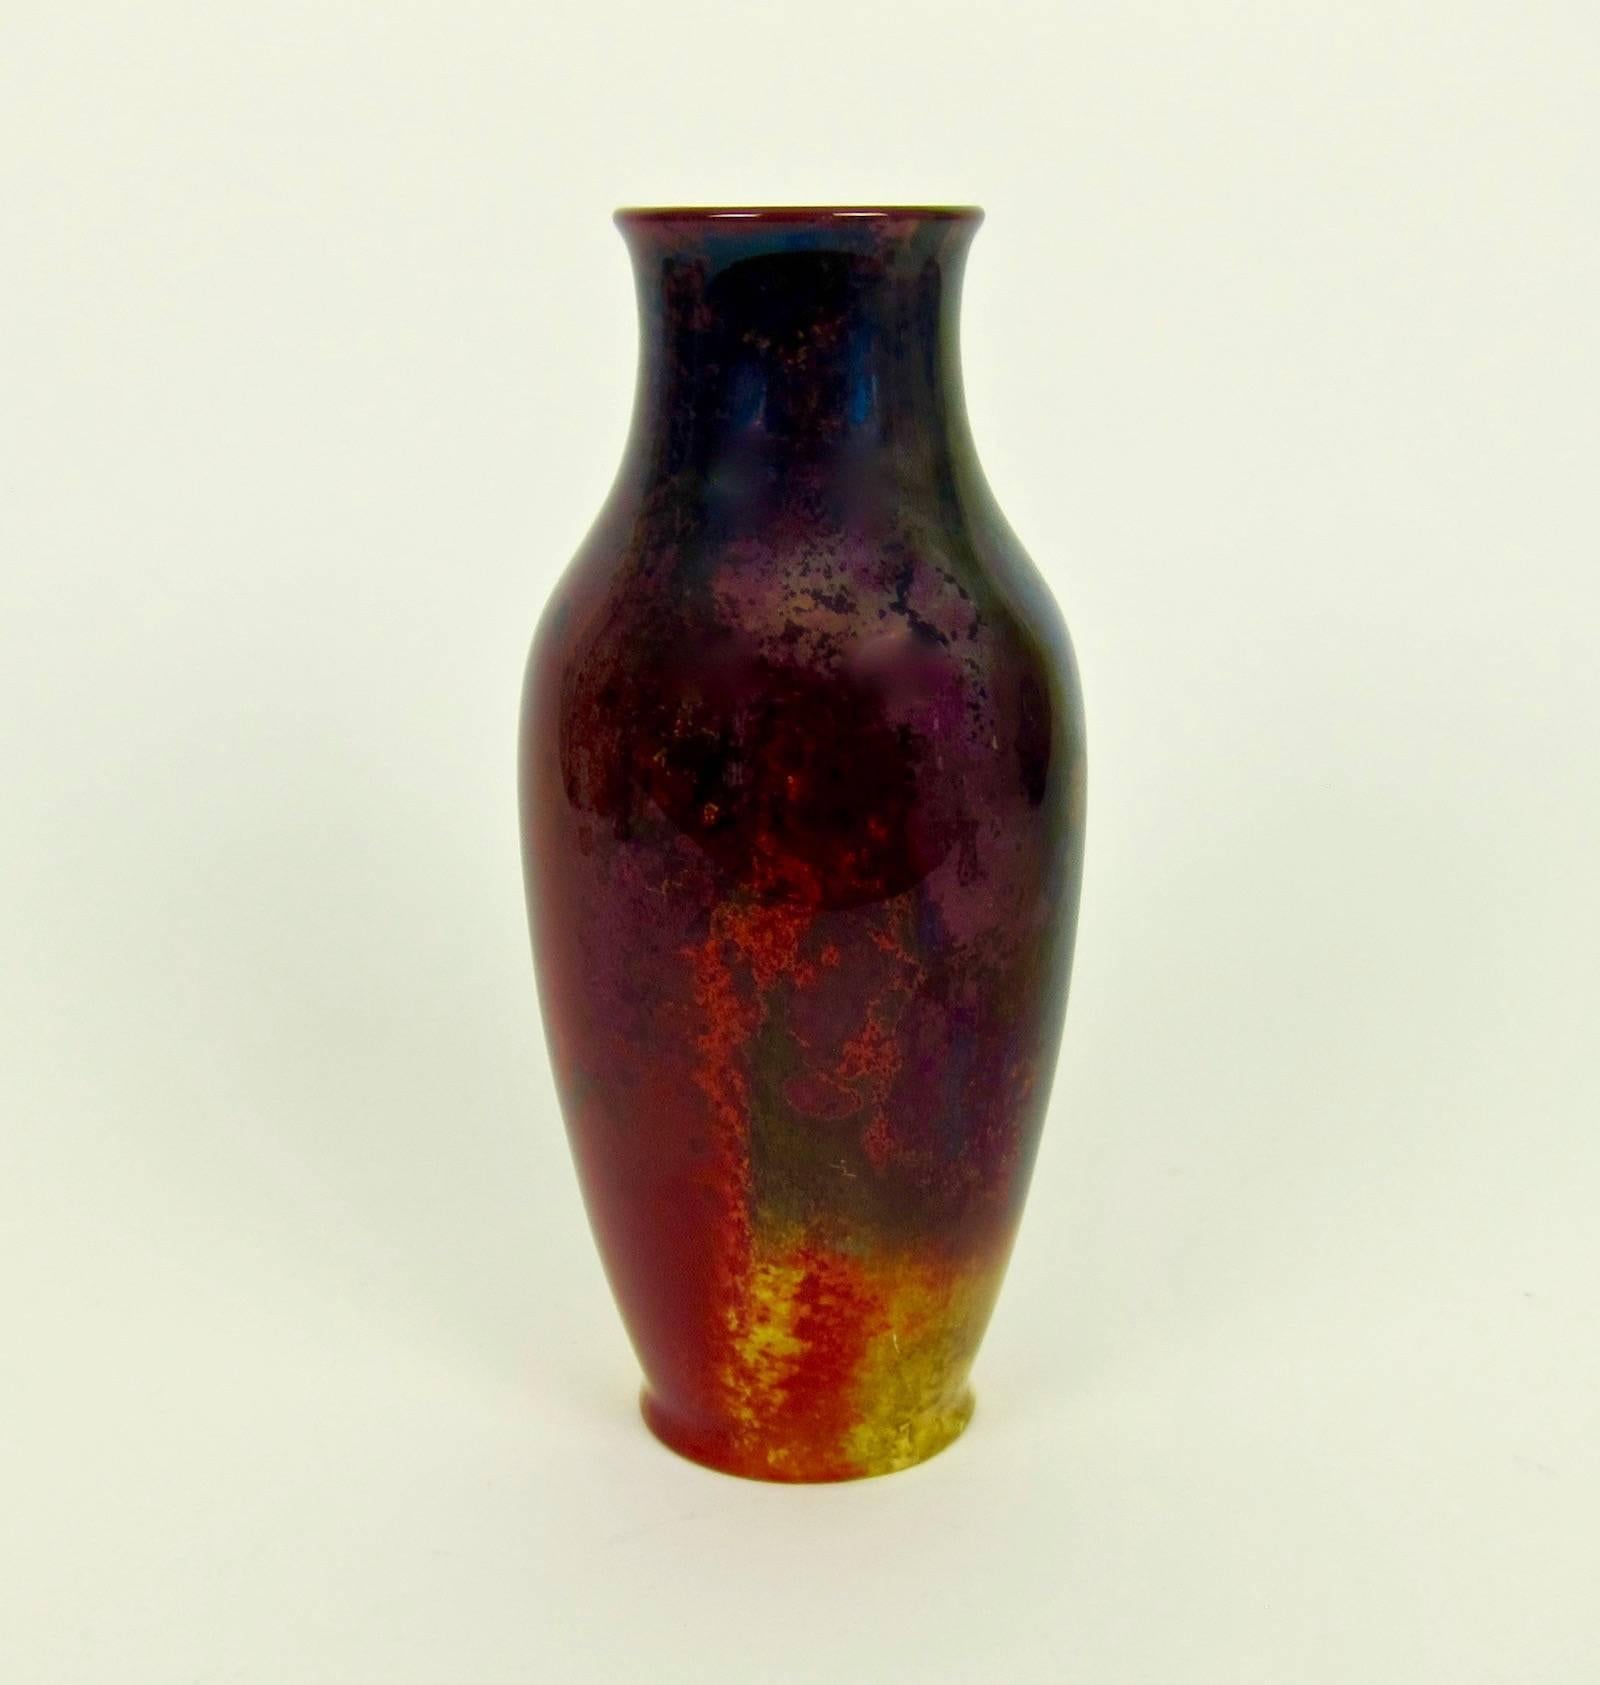 A large English Art Deco era Royal Doulton flambé vase artist signed by Harry Nixon (1886 - 1955), circa 1930. The baluster form vessel has a high-fired flambé glaze of deep, dark reds shading to violet, black and mottled gold.

Nixon worked closely